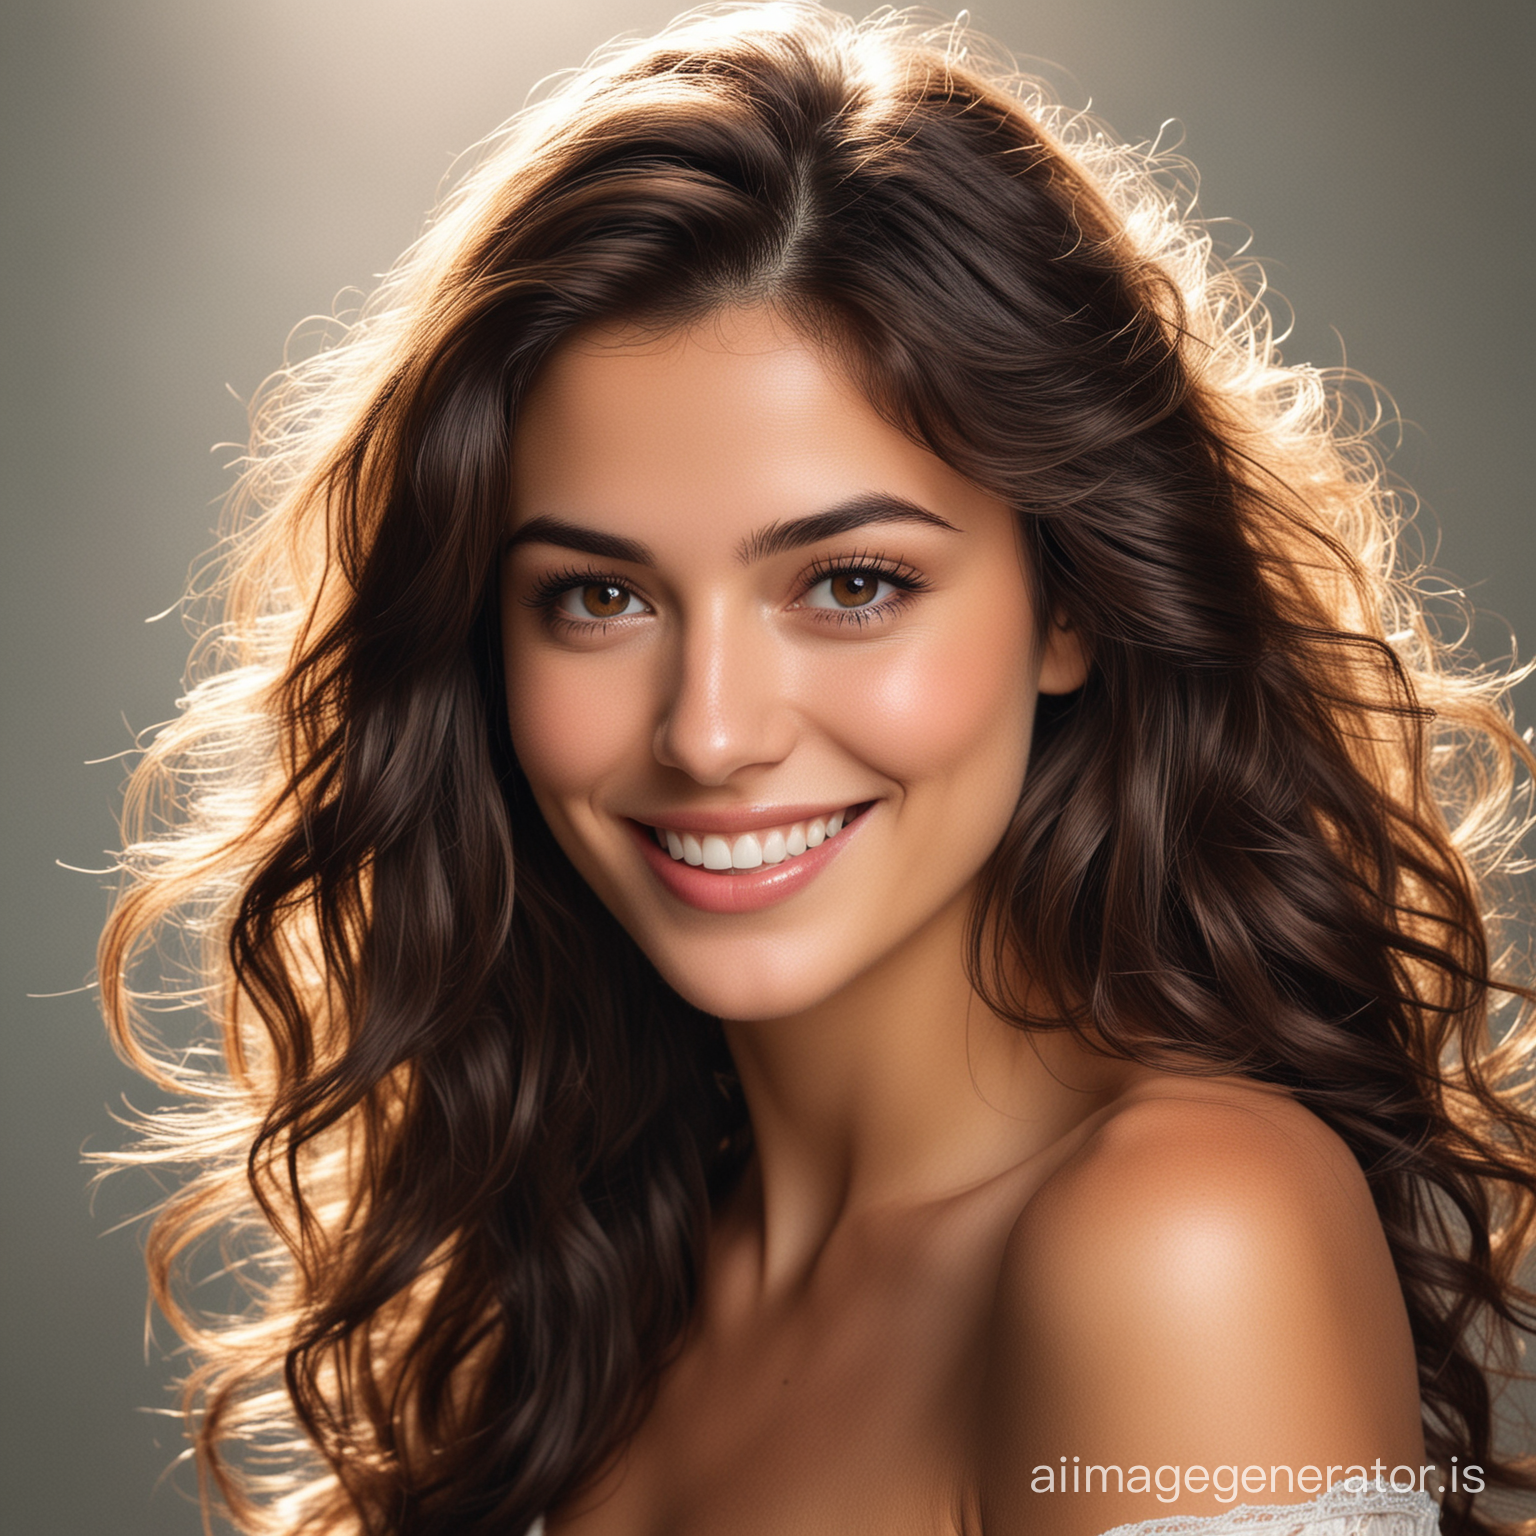 This woman possesses an undeniable allure, with her dark brown hair cascading down her shoulders in long, wavy strands that seem to dance with every movement. The richness of her hair complements her features, framing her face in a soft, enchanting manner.

Her smile, gentle and sweet, adds a radiant warmth to her countenance, drawing others to her effortlessly. It's the kind of smile that lights up a room and leaves a lasting impression on those lucky enough to witness it.

Her beauty goes beyond mere physical attributes; there's an undeniable grace and elegance in the way she carries herself, a magnetic presence that captivates those around her. It's as if she possesses an inner light that shines through, illuminating everything in her presence with its gentle glow.

In her presence, one can't help but be enchanted by her beauty, both inside and out. She is a true embodiment of grace, elegance, and charm, leaving a lasting impression on all who have the pleasure of encountering her.